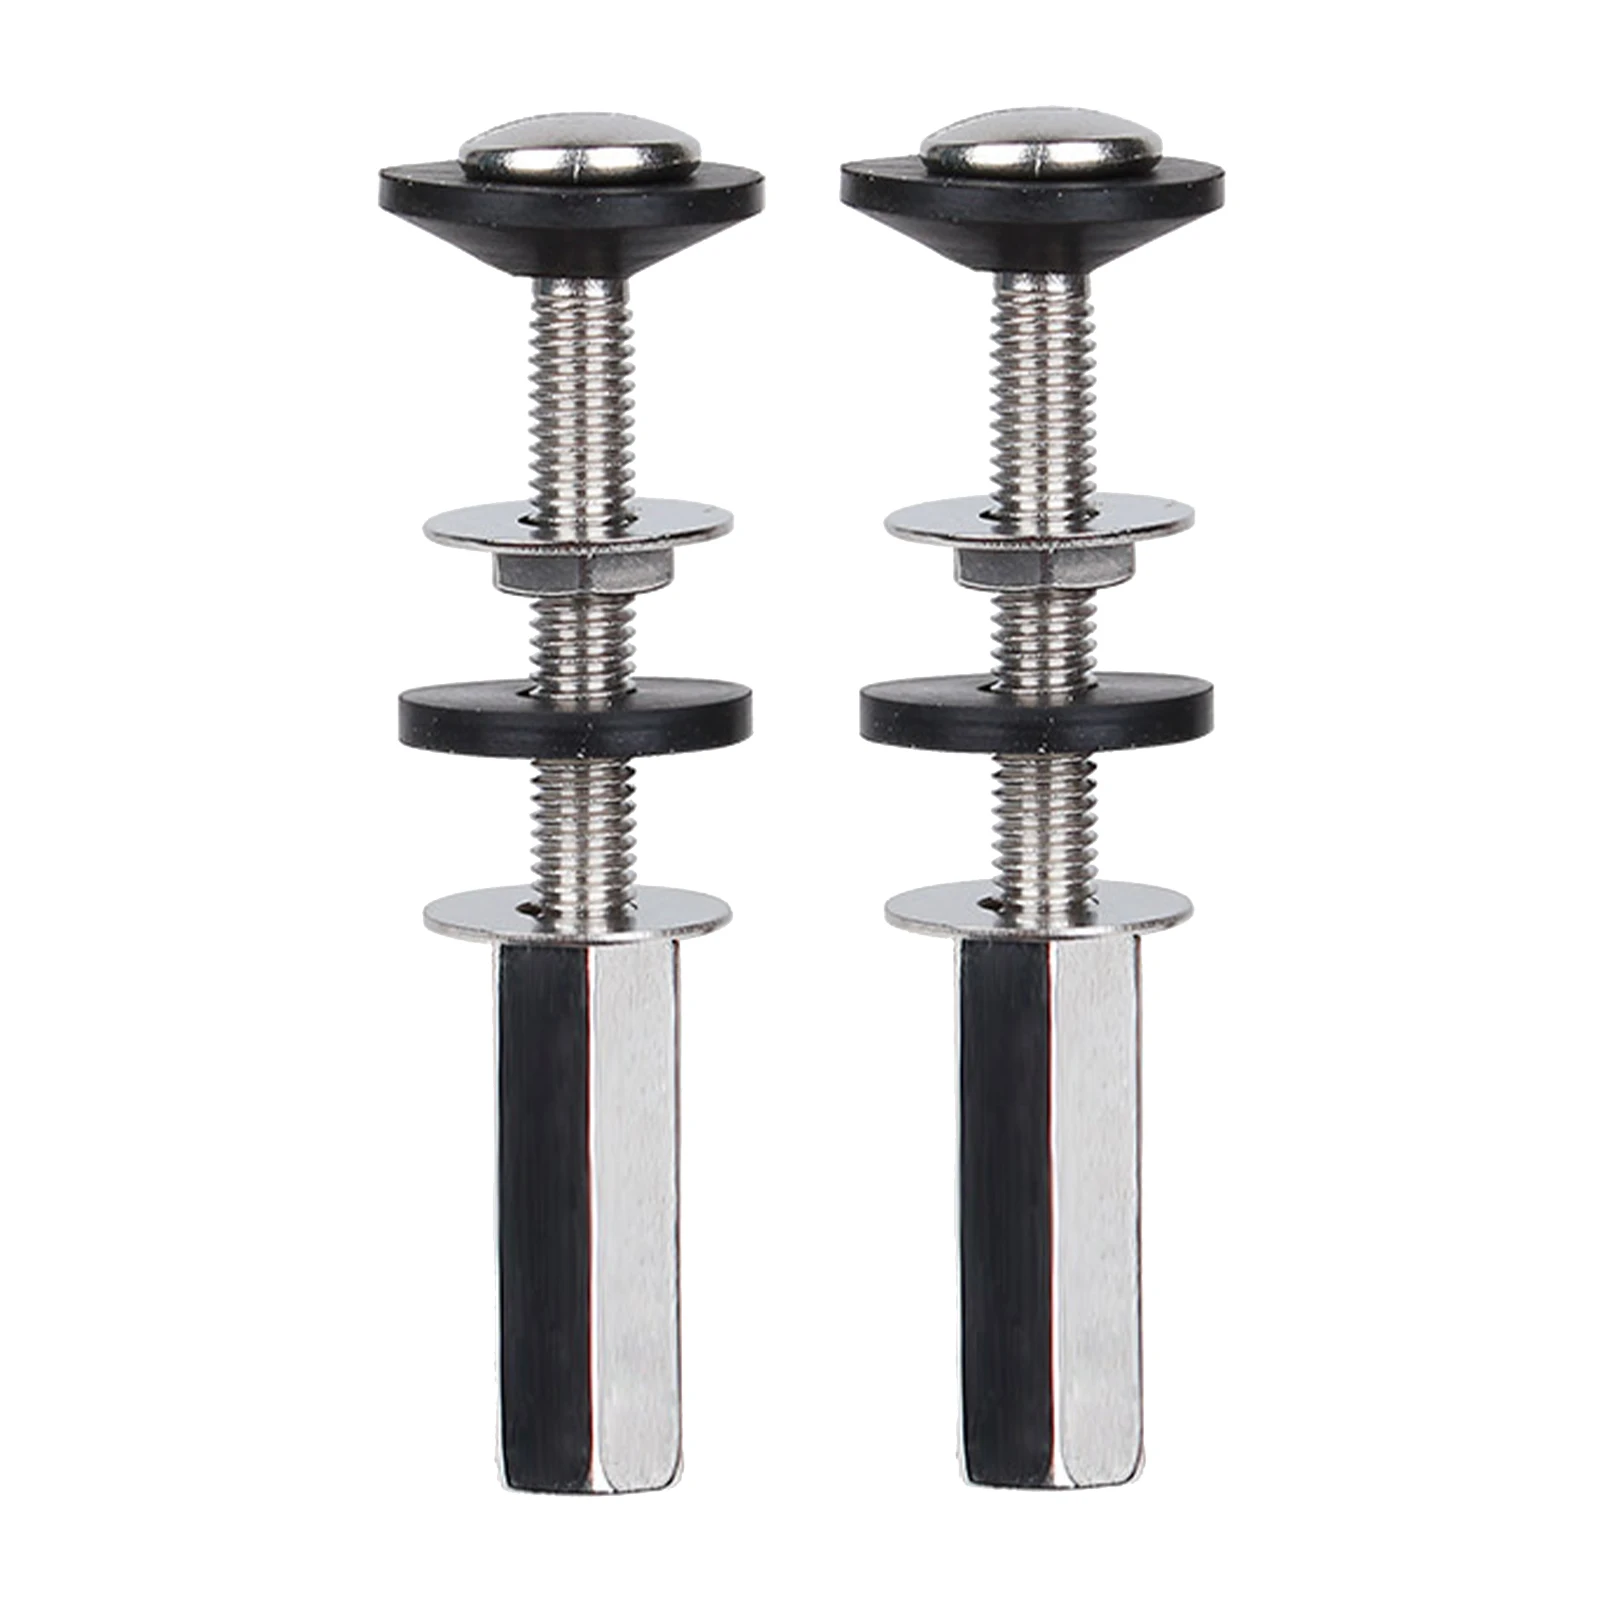 

1pair With Washers Fastening Toilet Bolt Kit Heavy Duty Screw Easy Install Repair Tank To Bowl Extra Long Nuts Stainless Steel